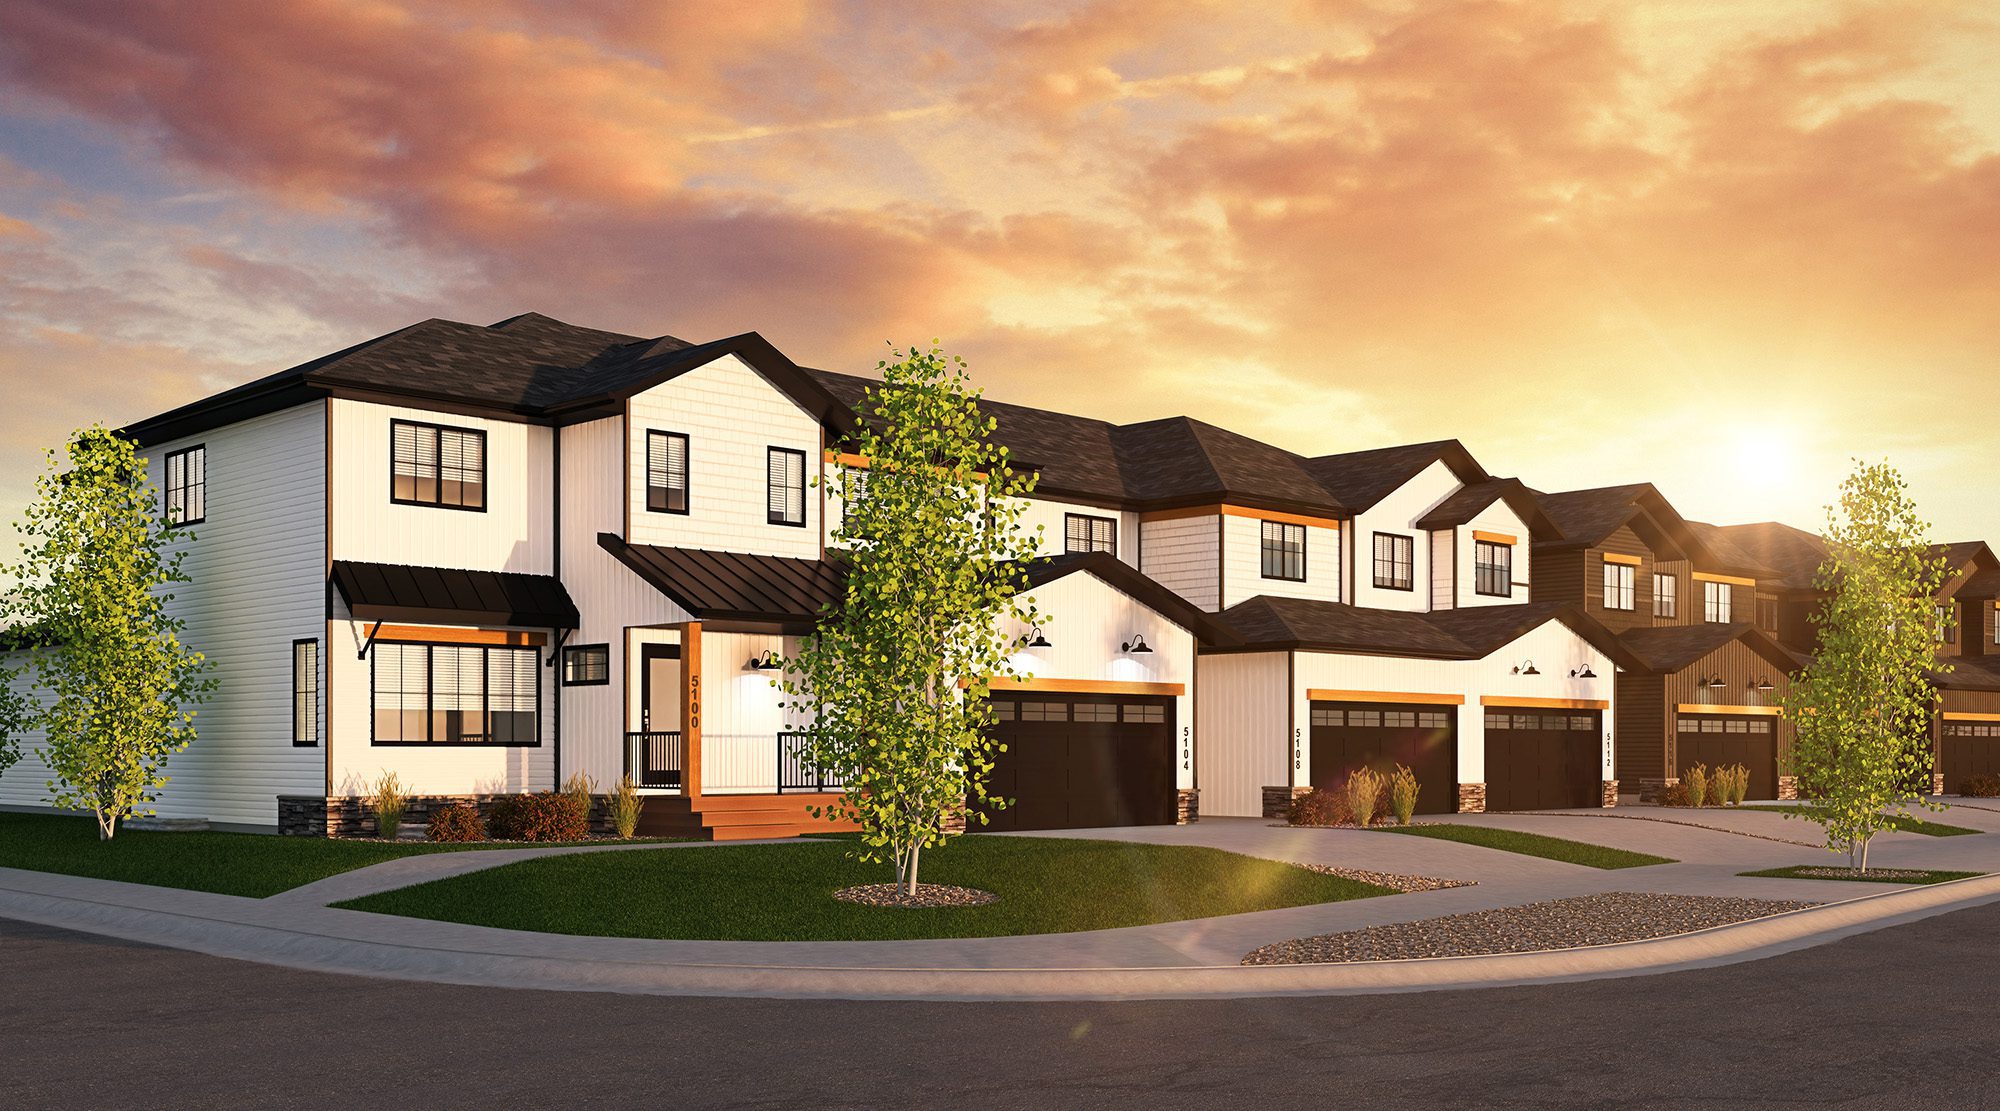 A rendering of a townhouse at sunset.